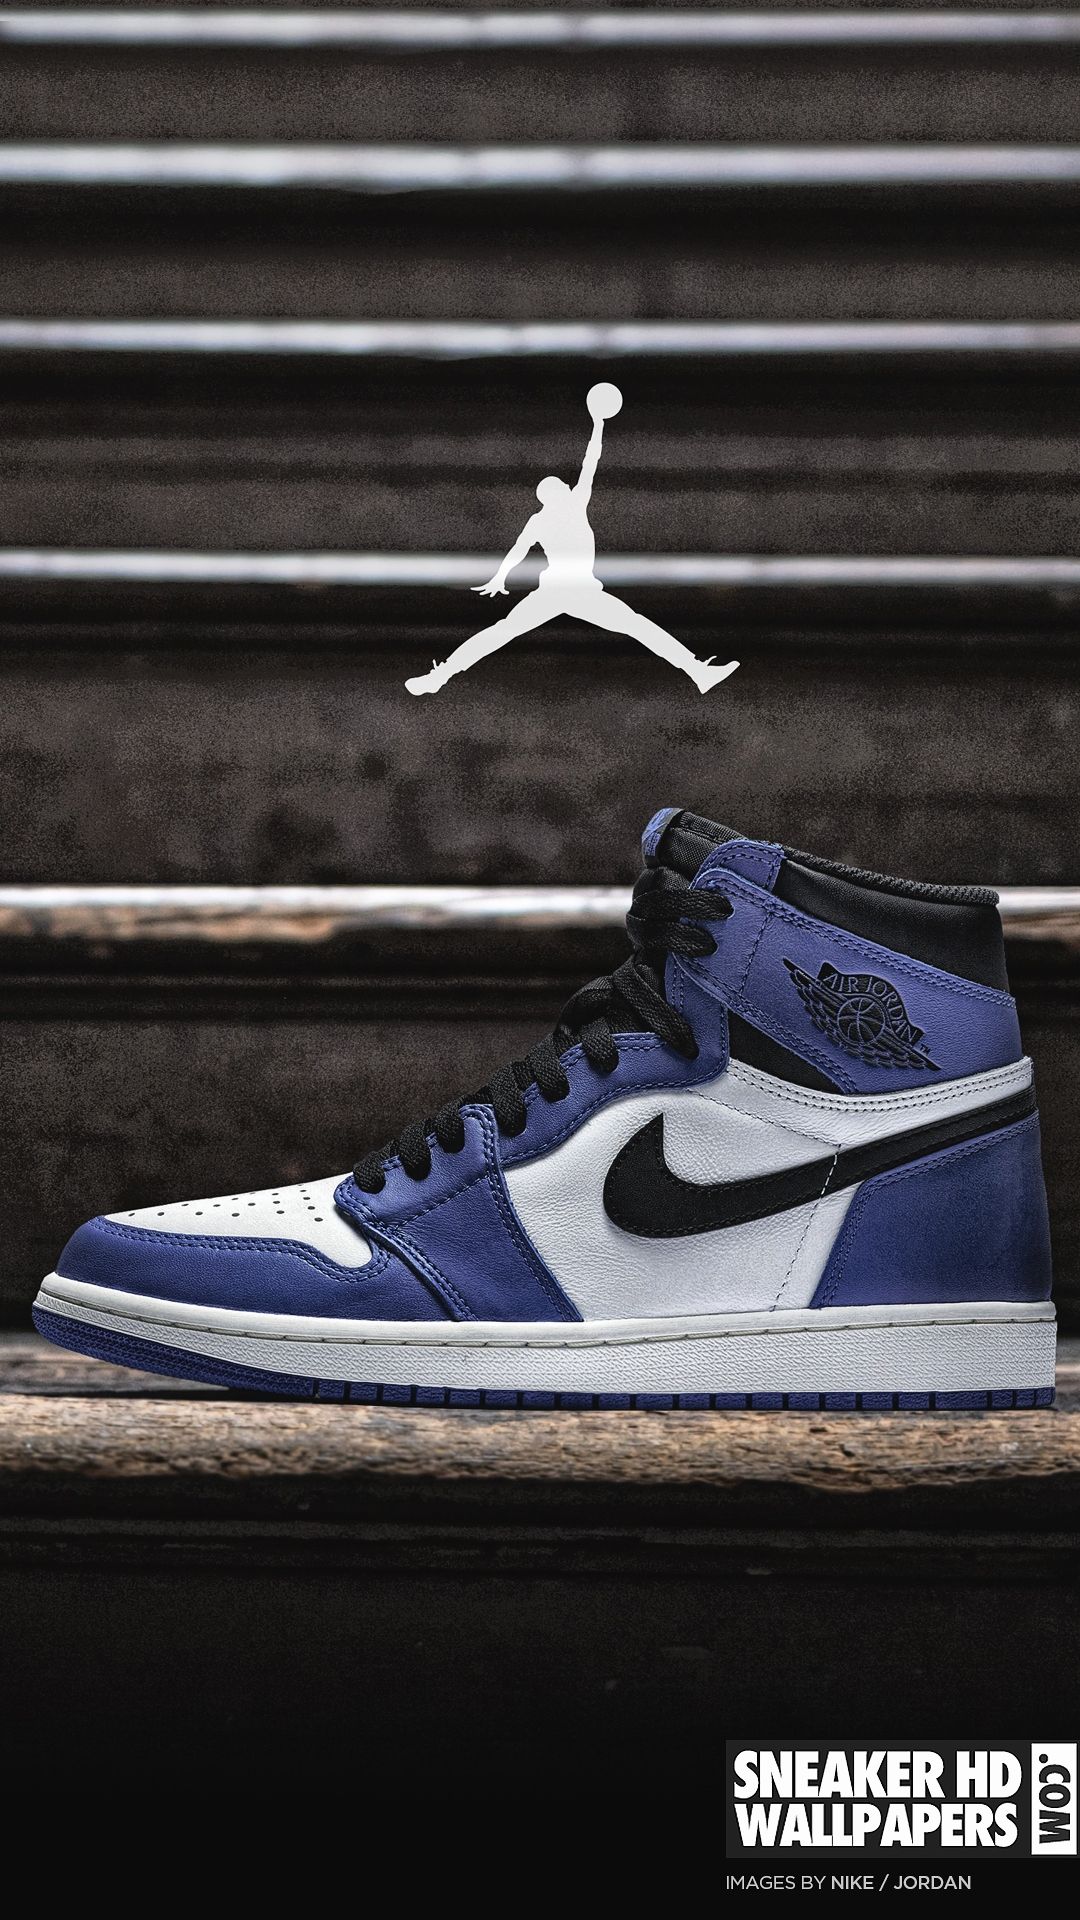 Jordan 1 Wallpaper Best Of Cool Shoes HD Wallpaper 76 Image for You of The Hudson